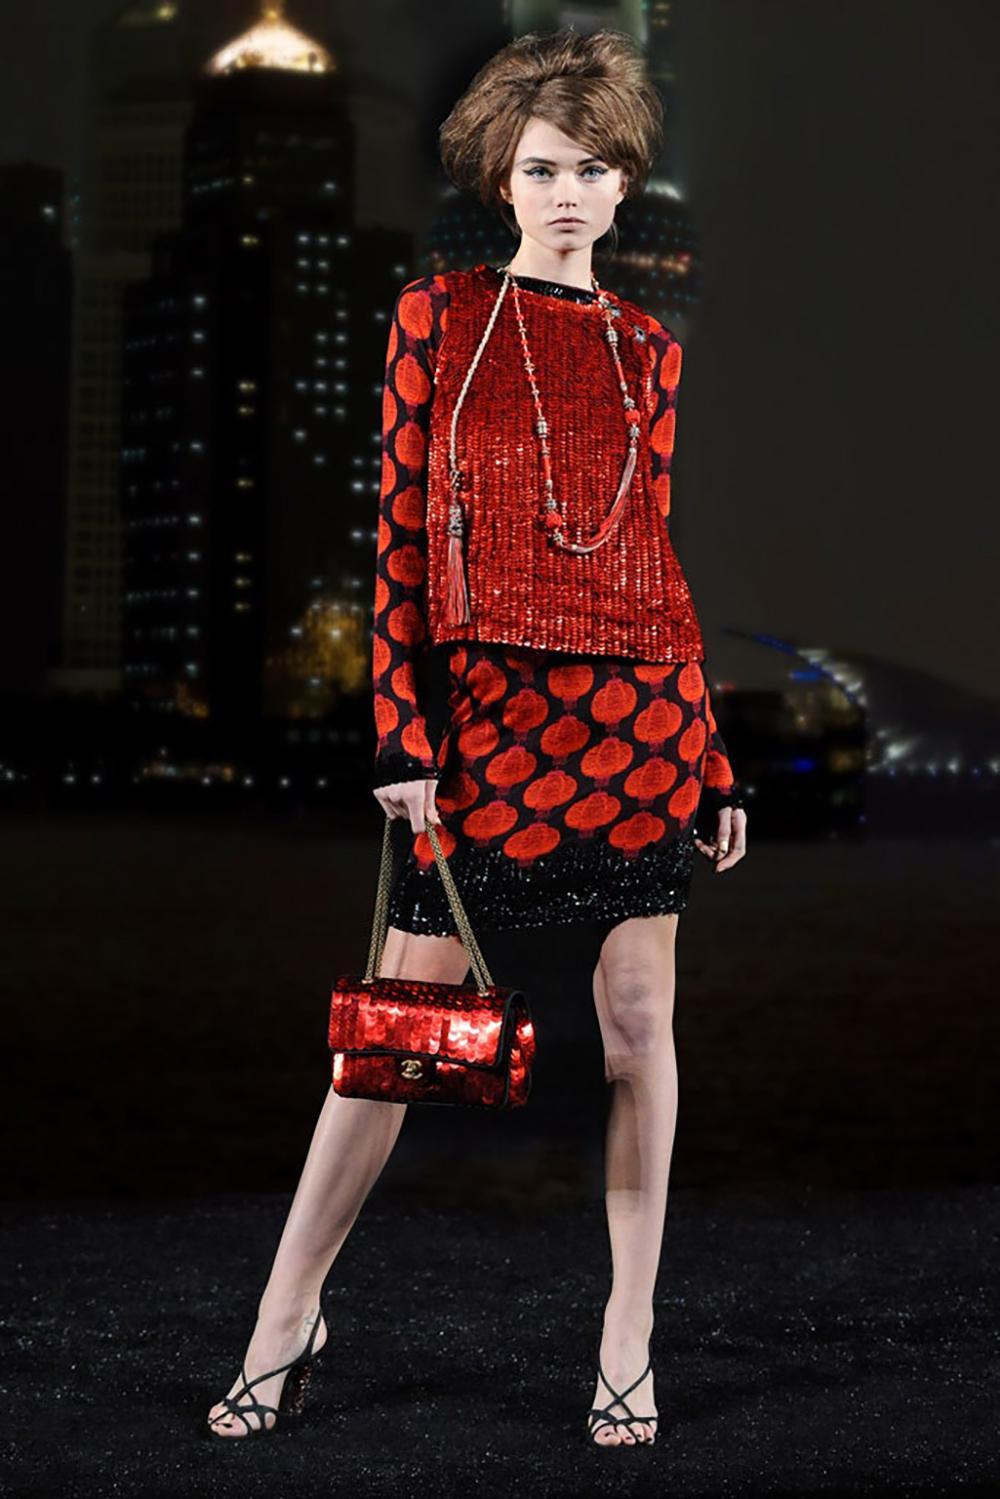 Chanel Paris / Shanghai Ad Campaign Embellished Dress In Excellent Condition For Sale In Dubai, AE